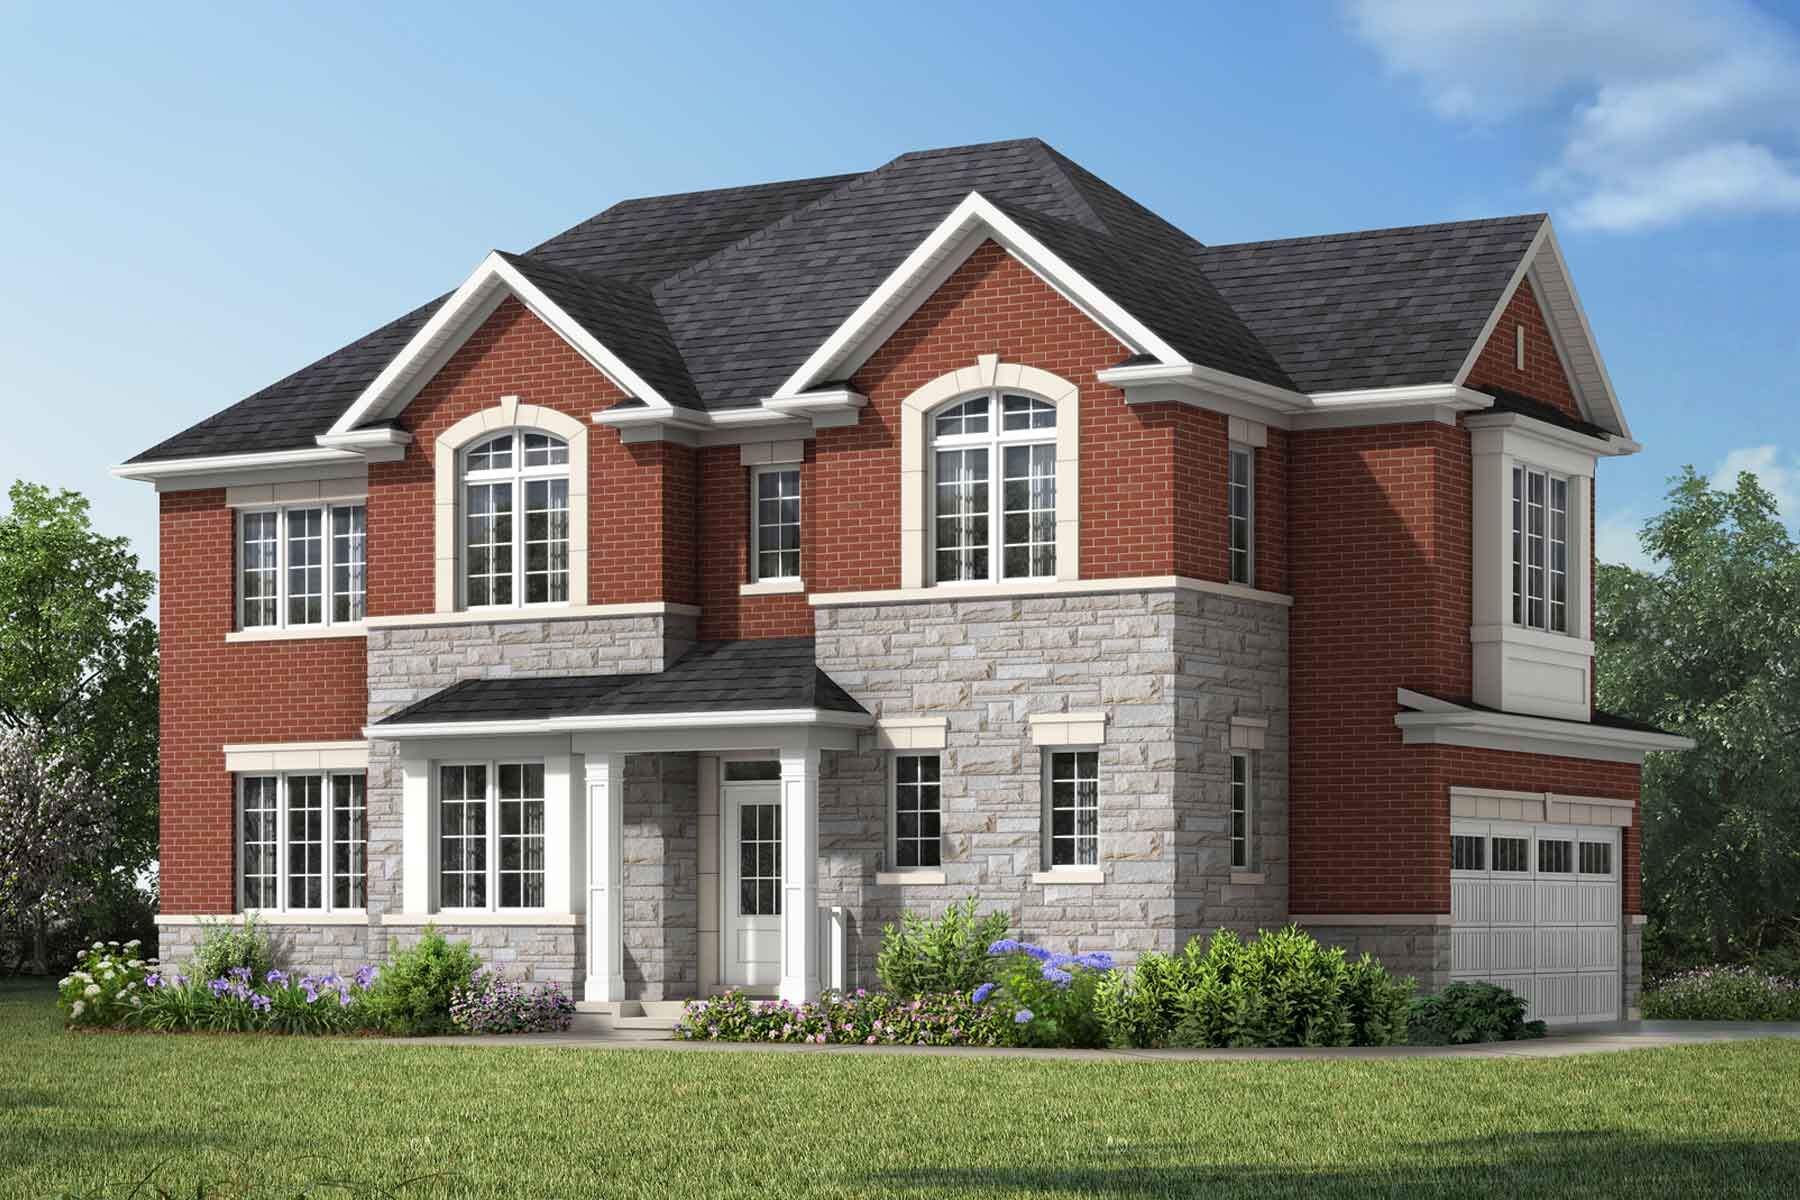  Elevation Front with window, garage, exterior stone and exterior brick